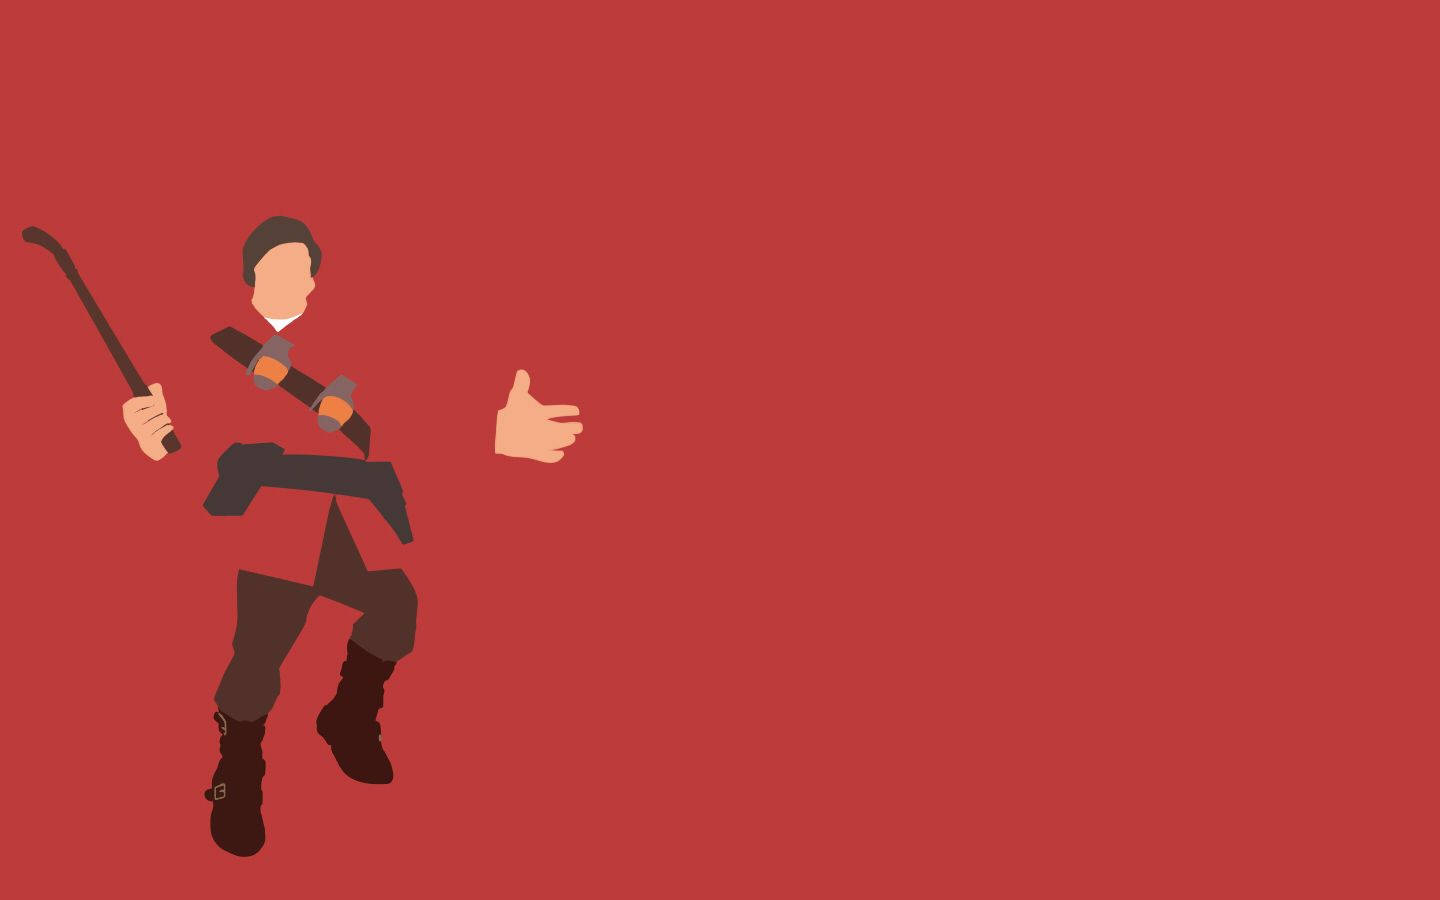 A Cartoon Character With A Stick And A Red Background Wallpaper